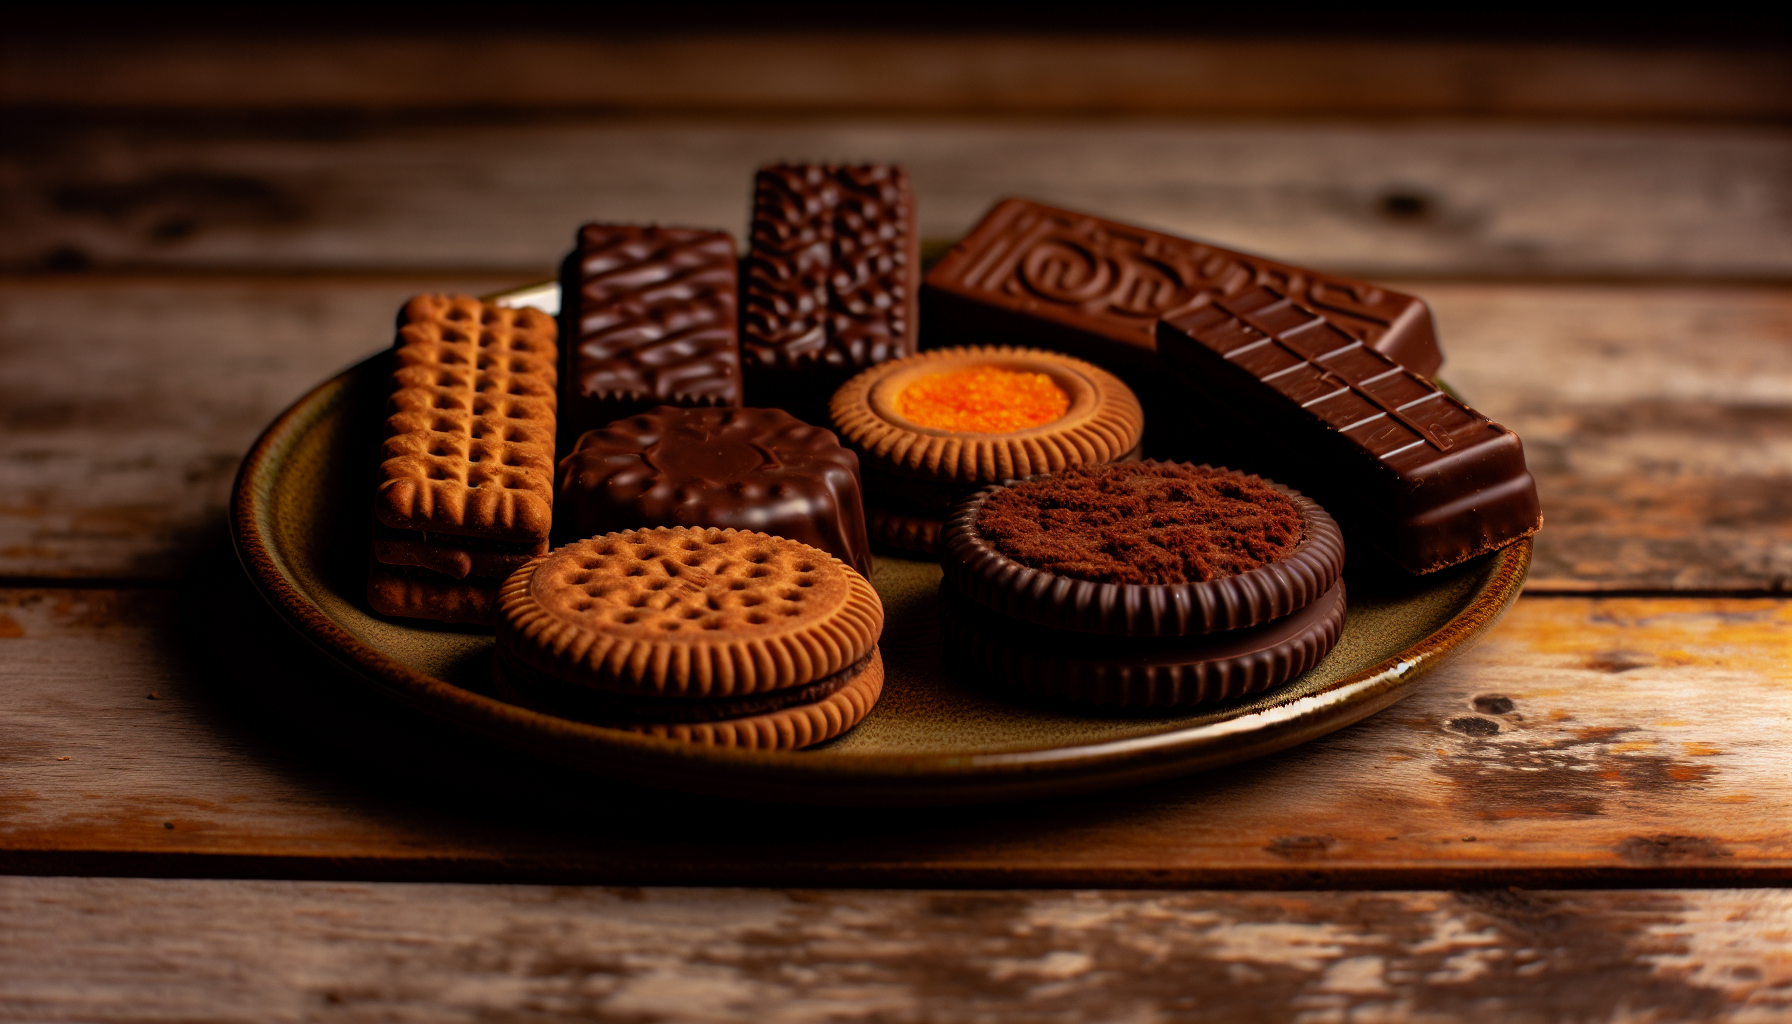 Assorted chocolate biscuits on a plate